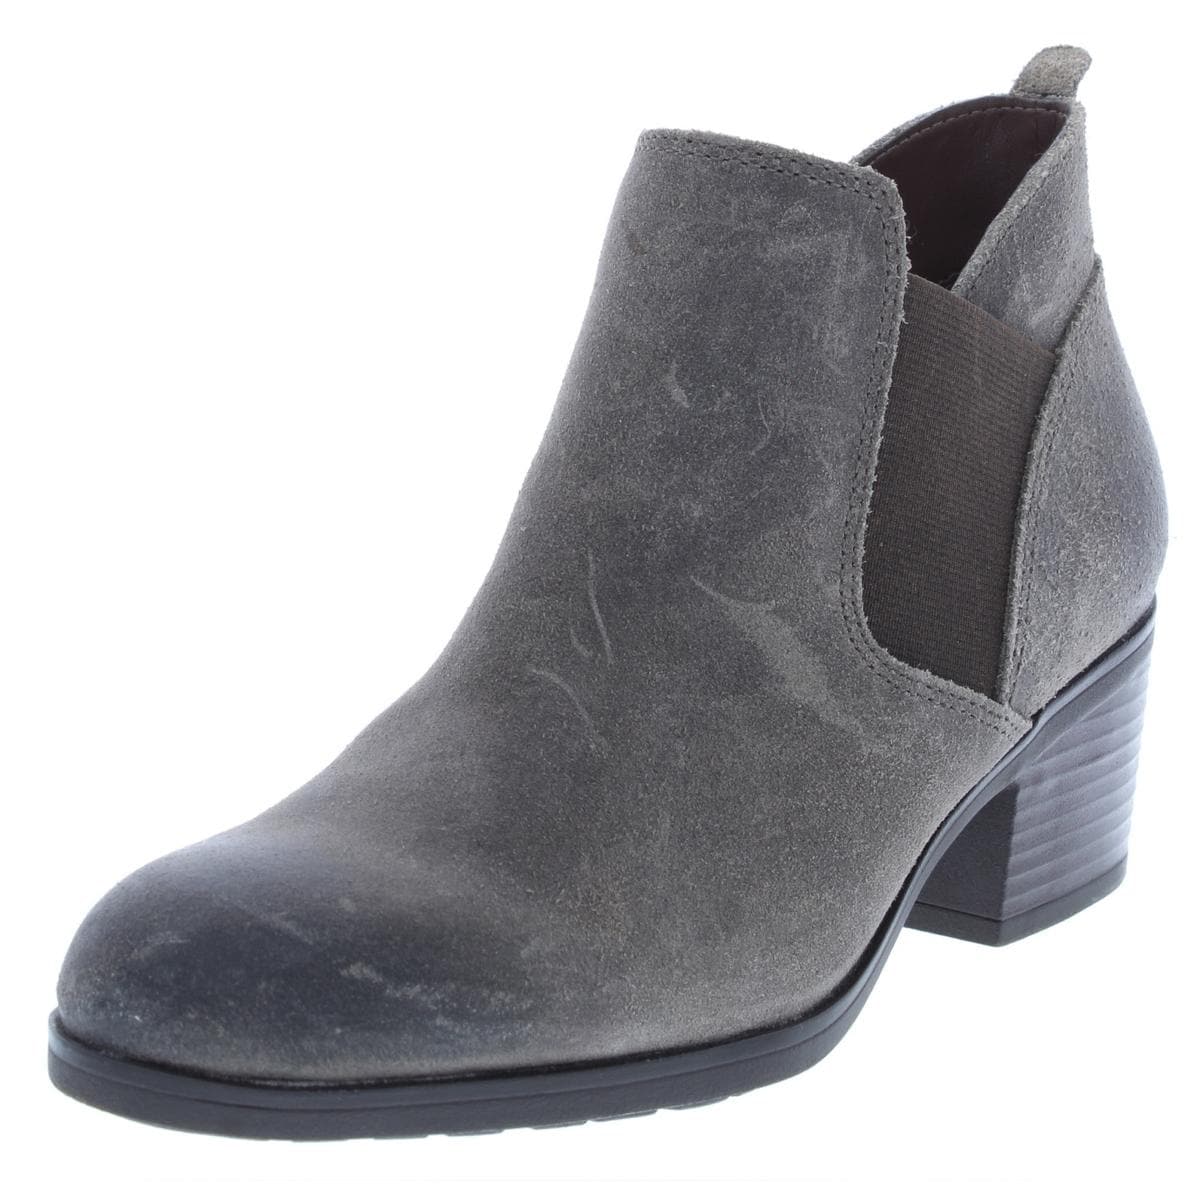 rockport chelsea boots